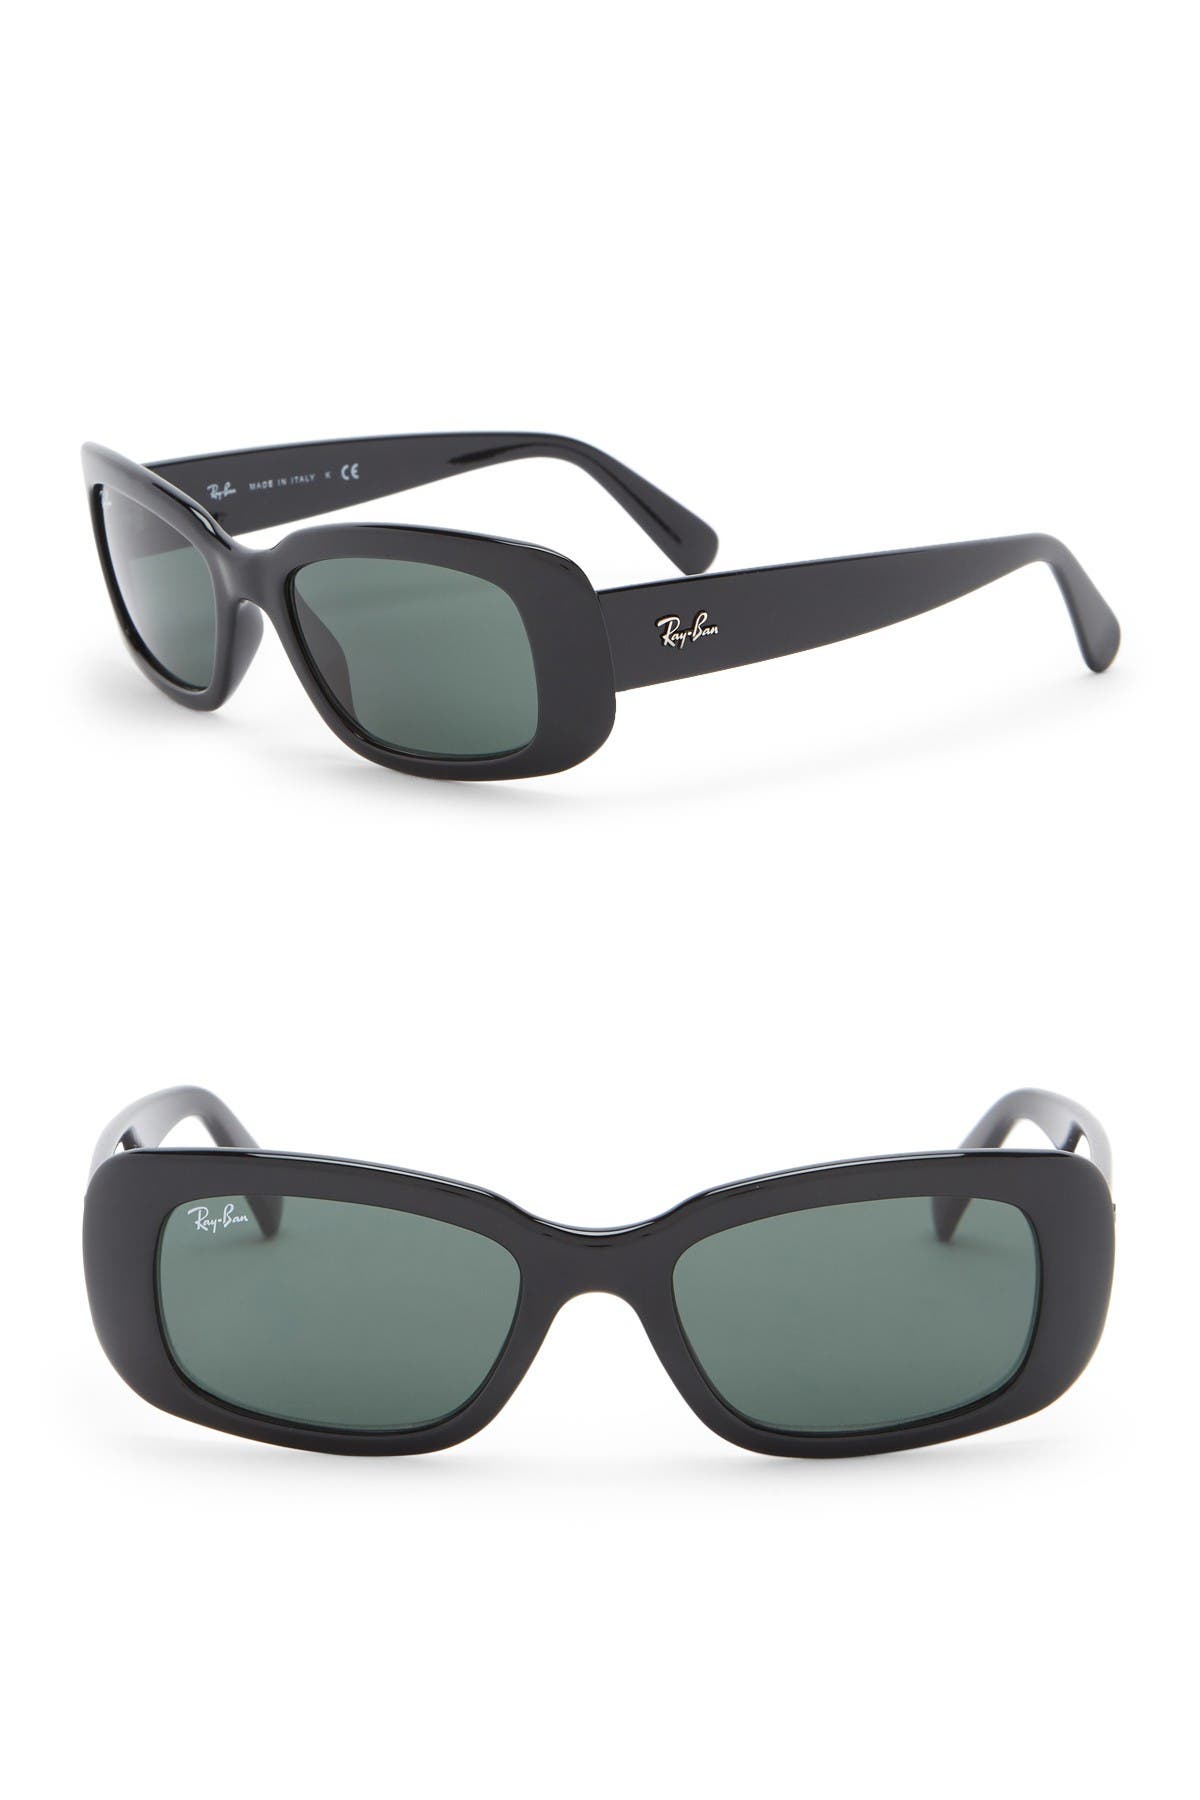 ray ban sunglasses for $20